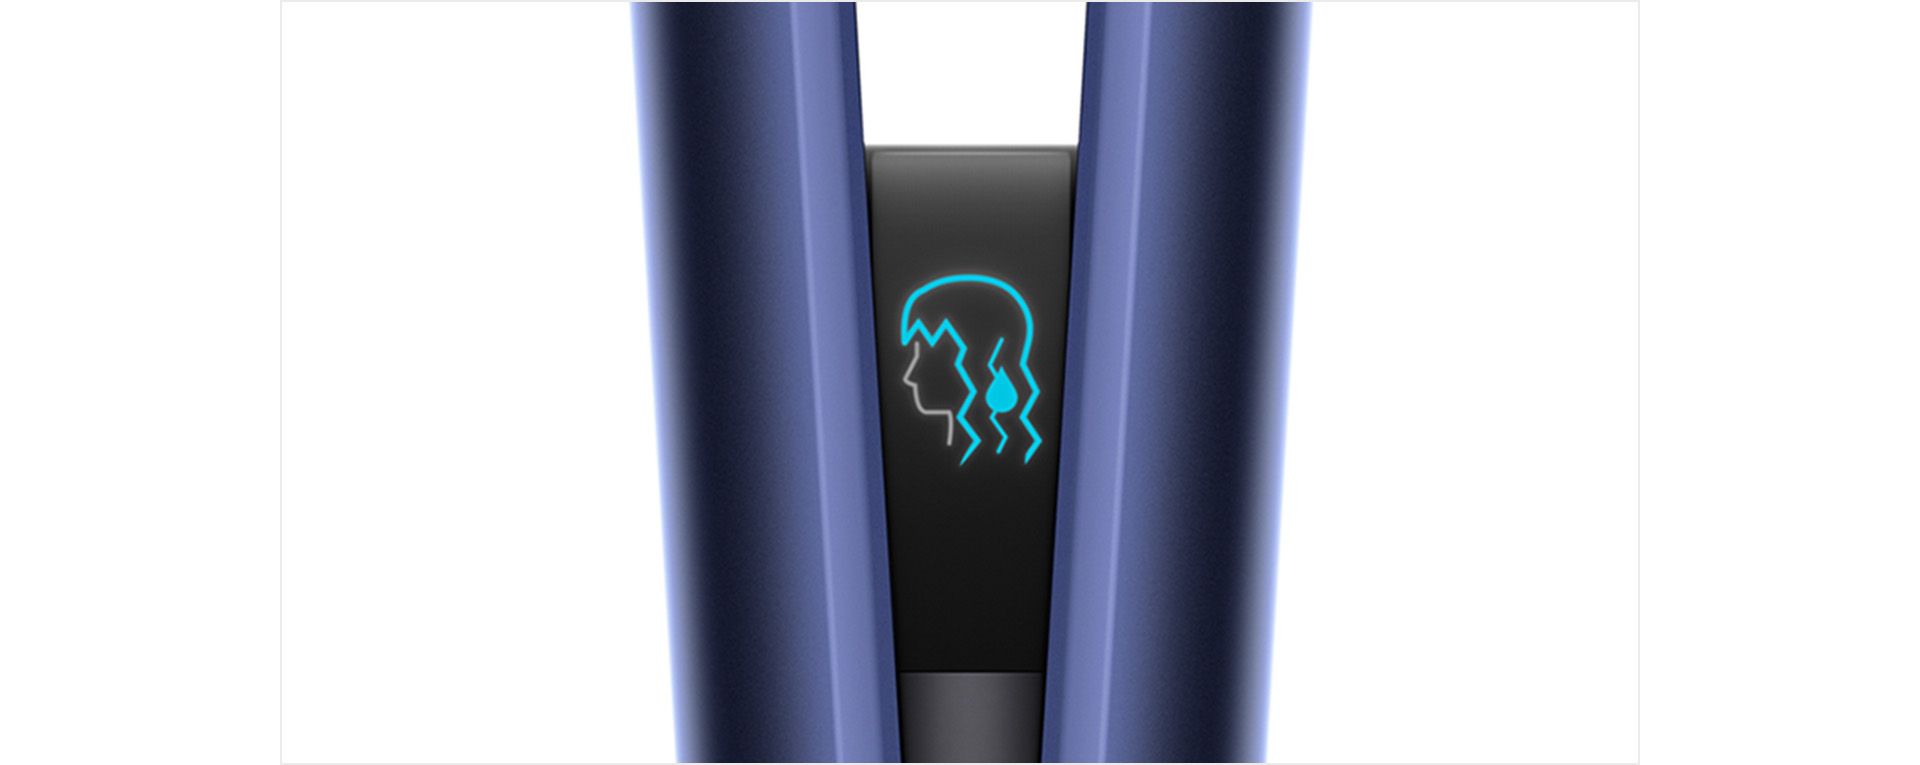 Close-up of the Dyson Airstrait LCD screen, with animations.